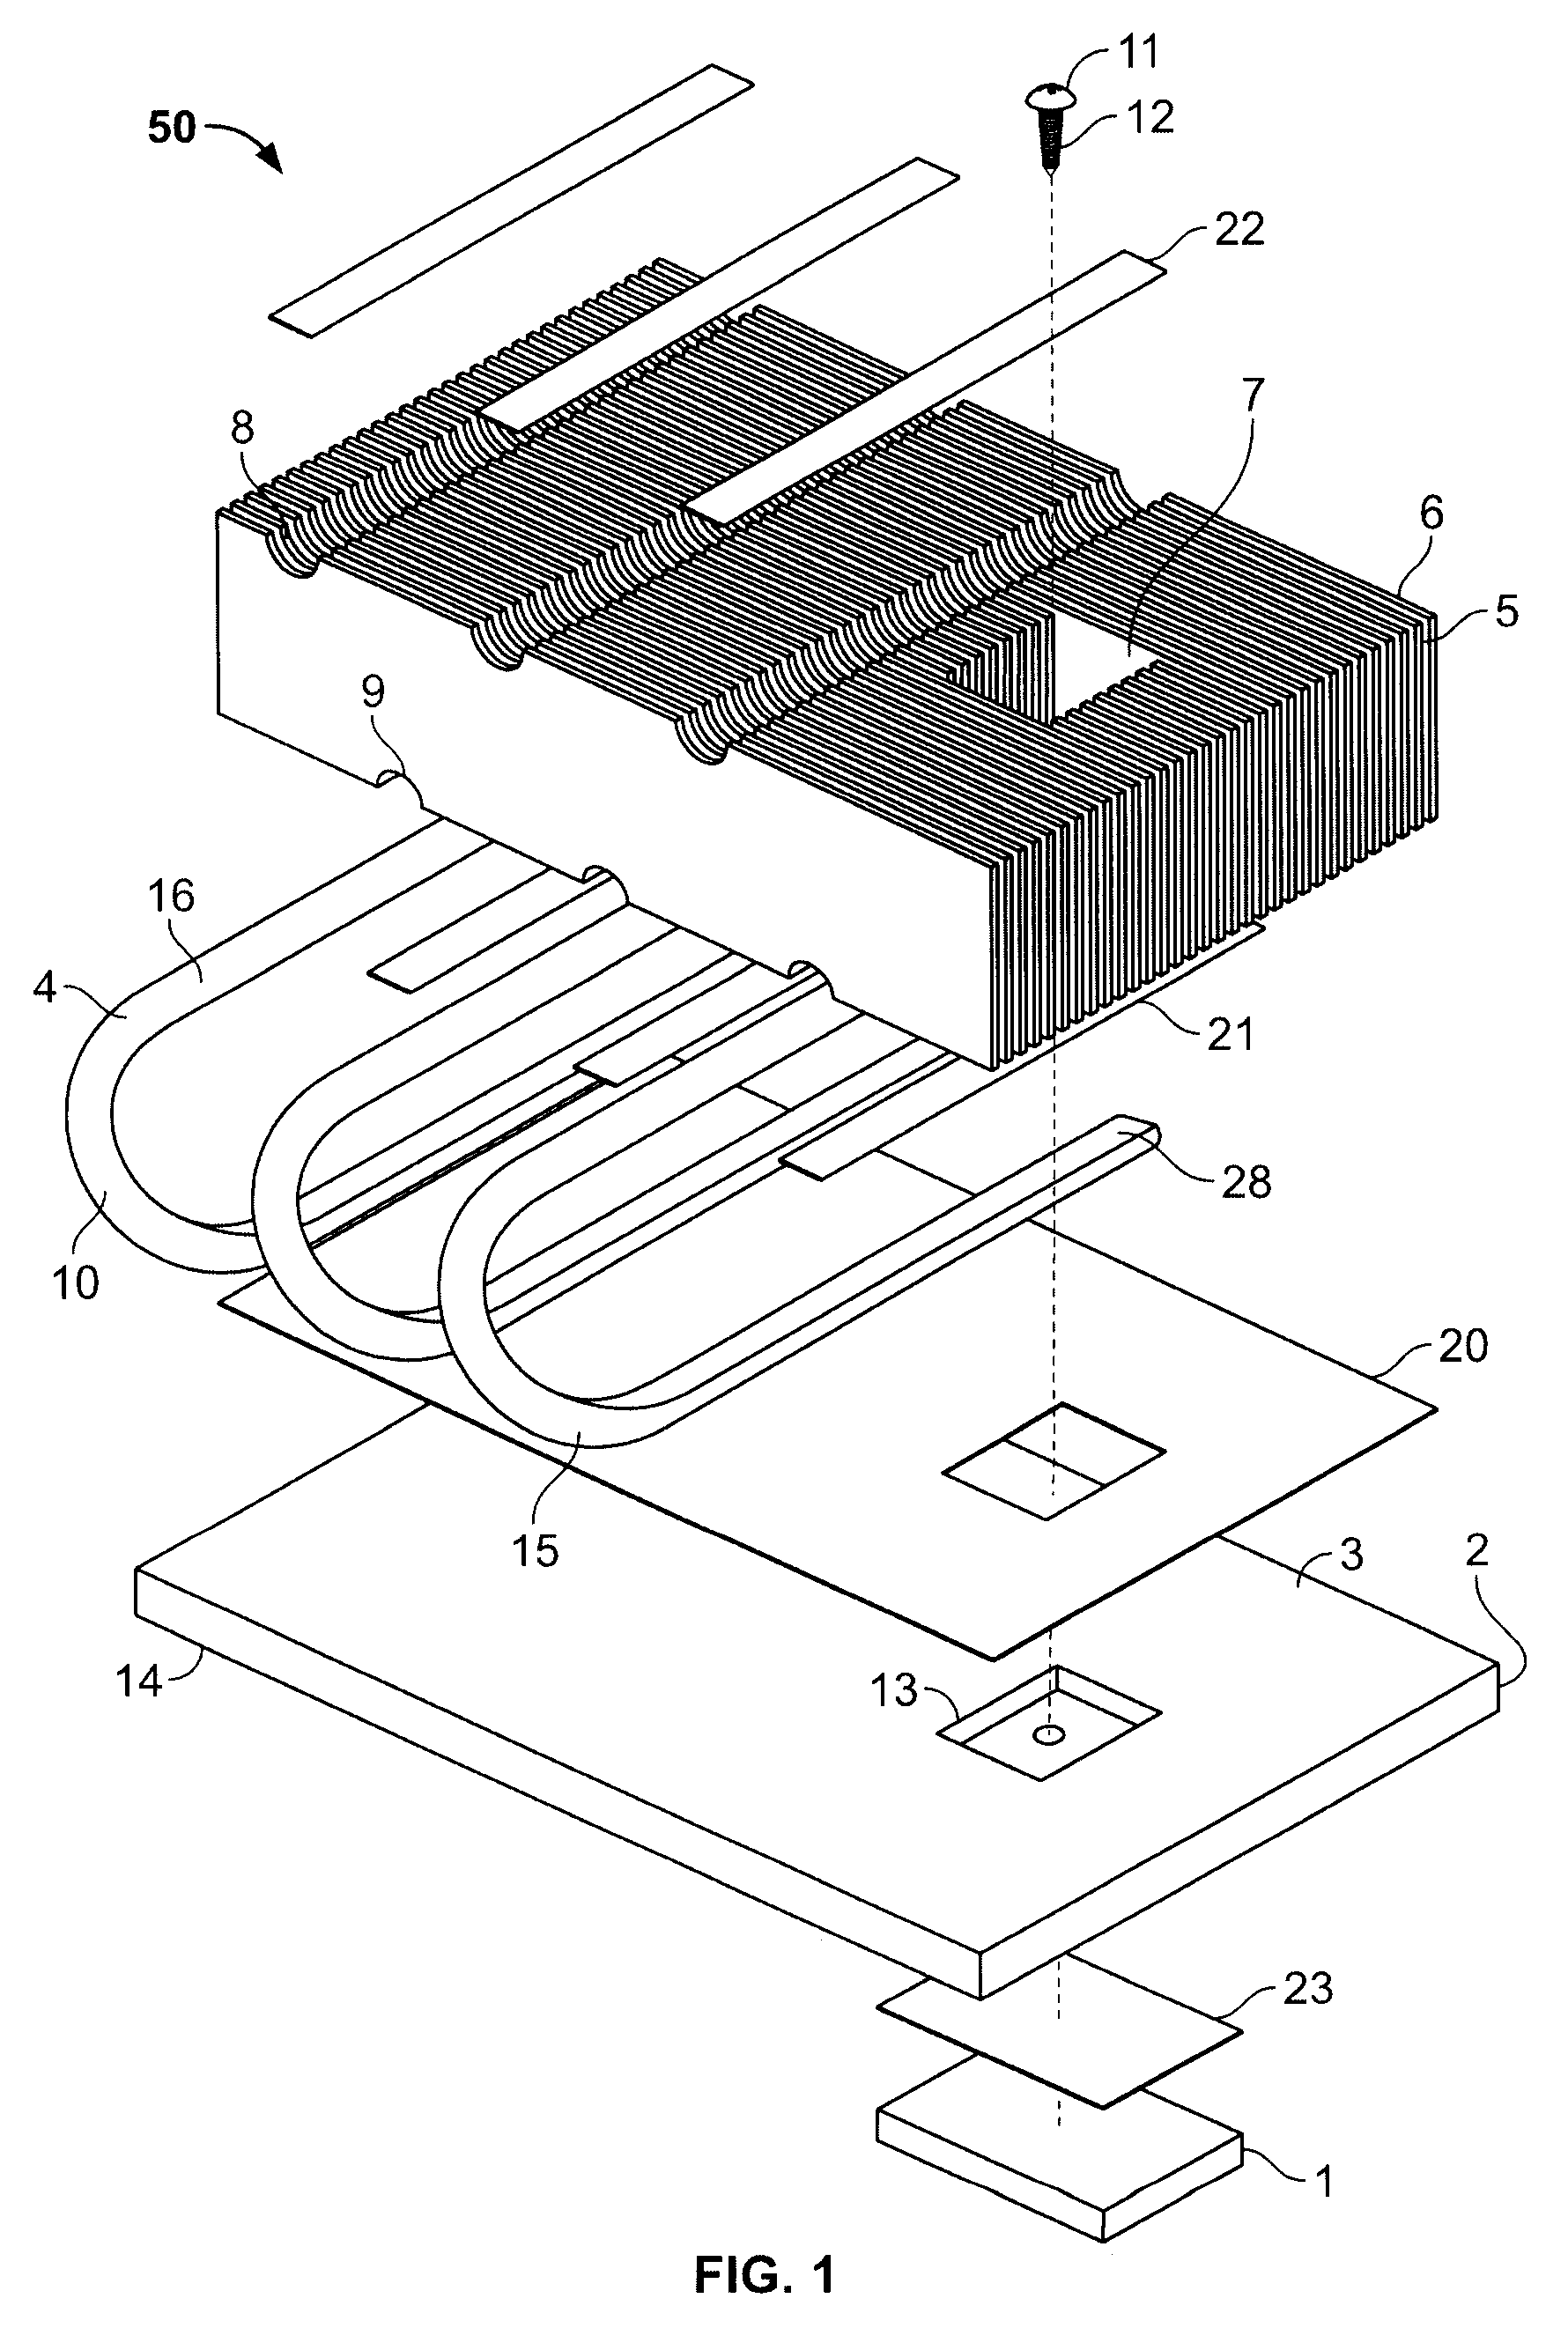 Three-Dimensional Thermal Spreading in an Air-Cooled Thermal Device